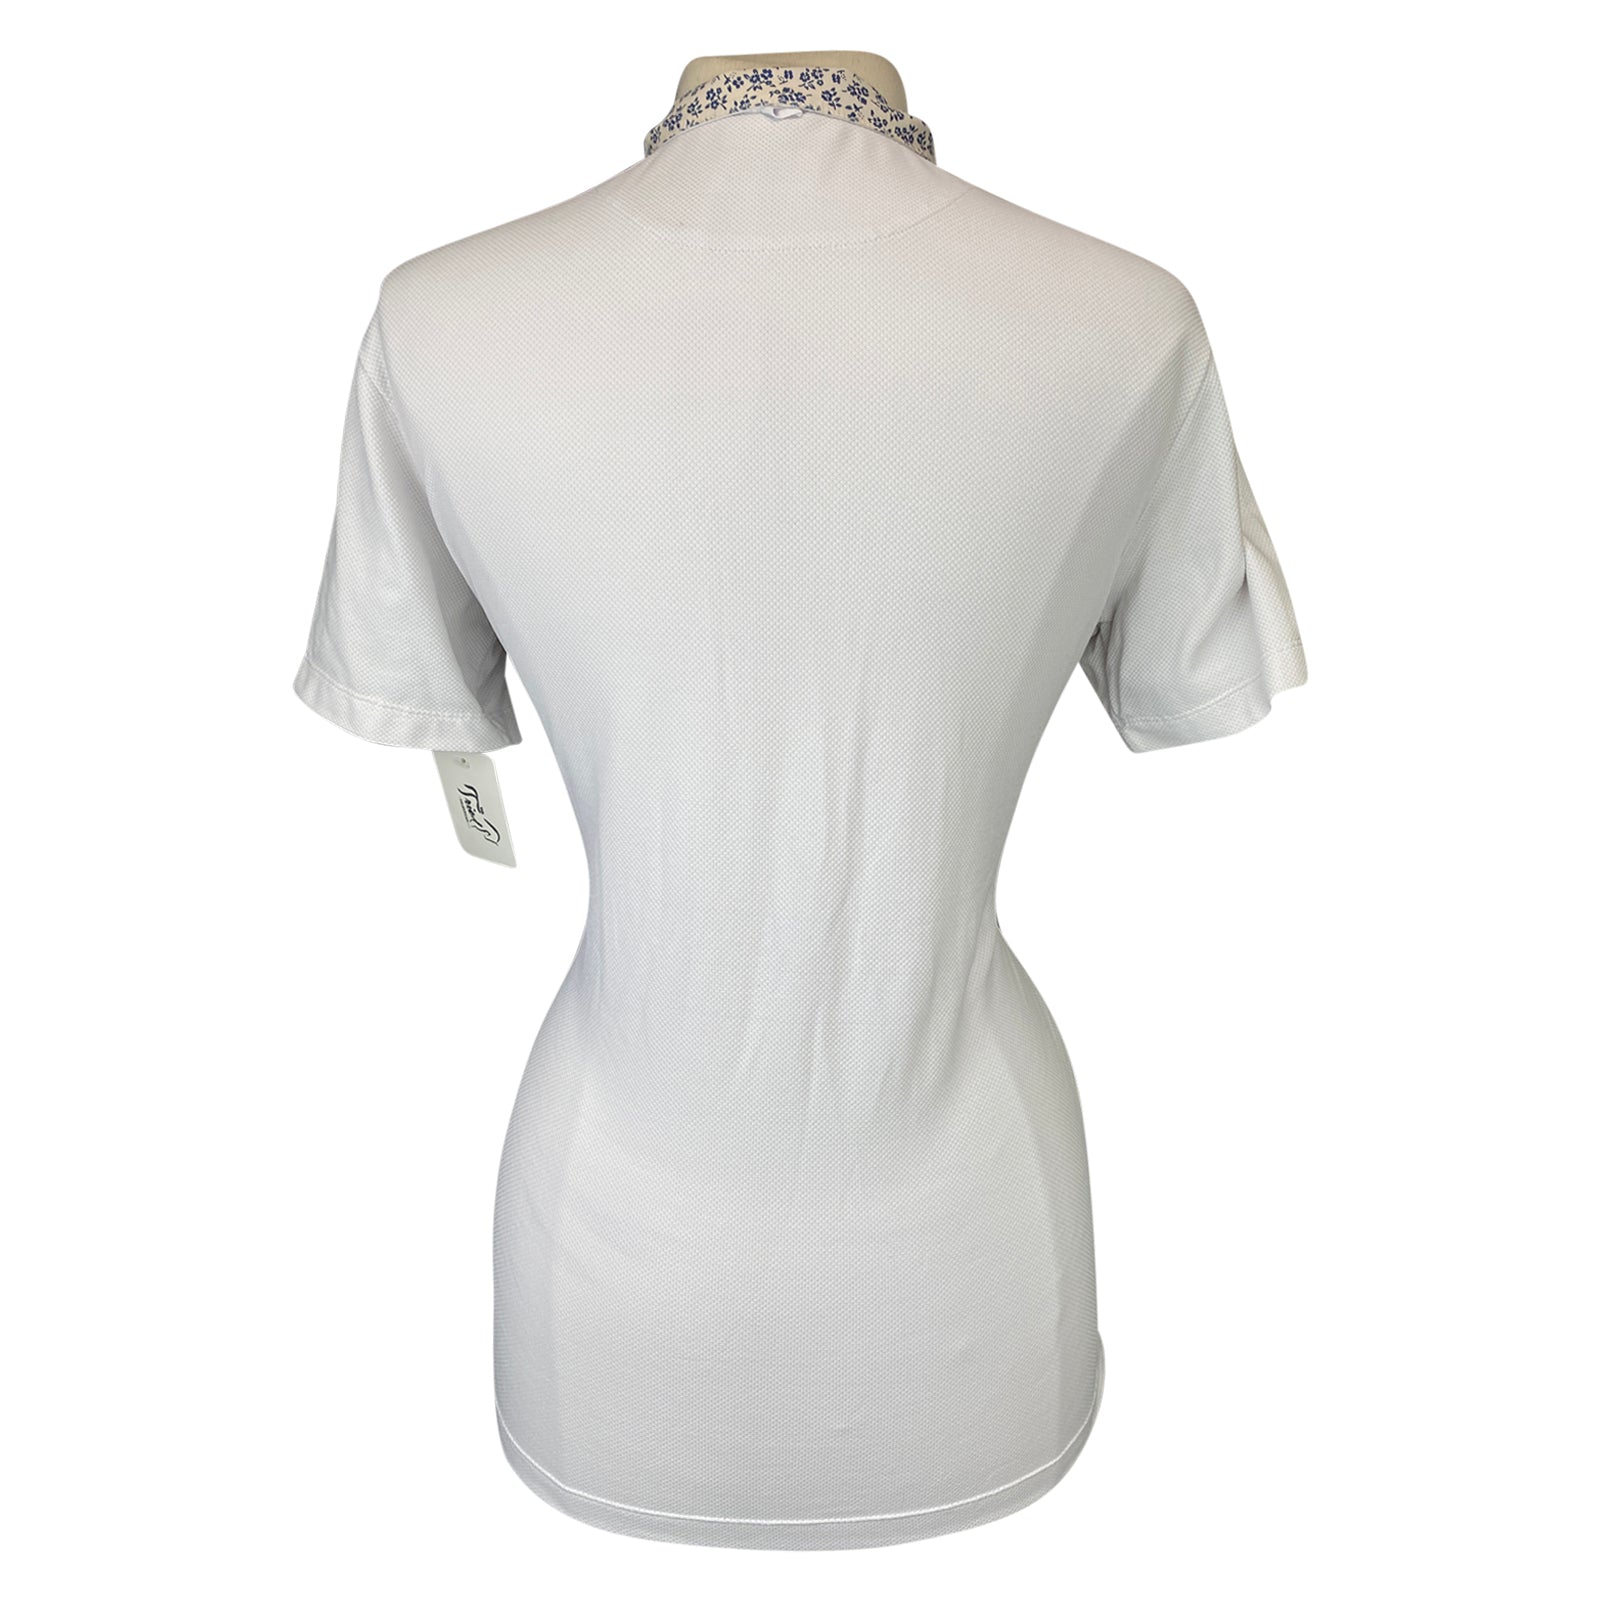 Back of Animo &#39;Basilea&#39; Short Sleeve Show Shirt in White/Tan Floral Collar